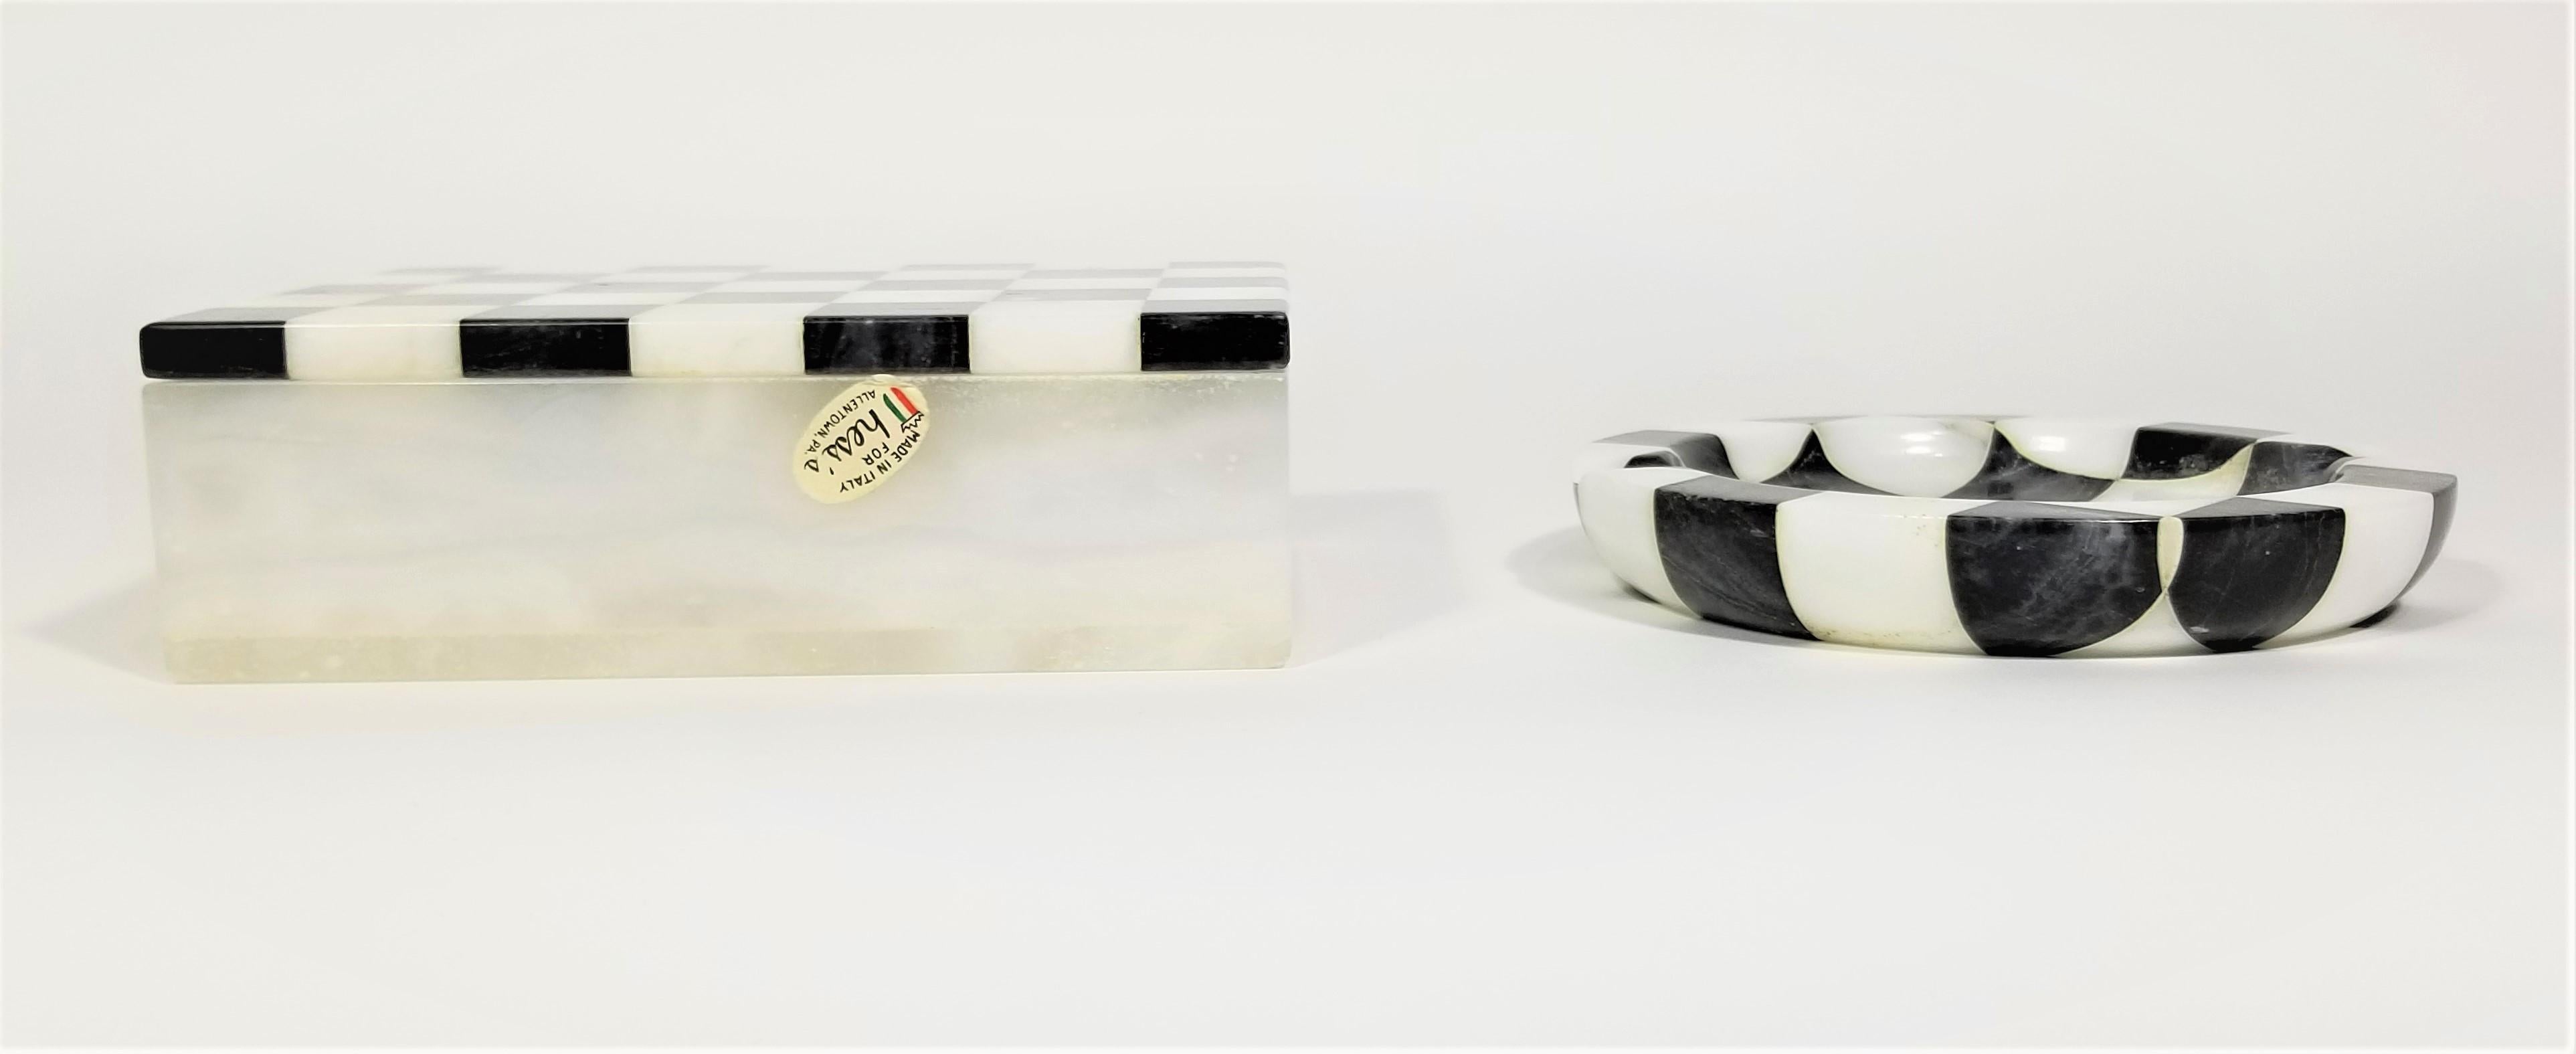 Mid century 1960s Italian black and white checked patterned marble ashtray with covered box smoking set. Made in Italy. Unused and both pieces still retain original marking stickers.

Measurements:
Circular ashtray height:: 0.75 inches
Circular